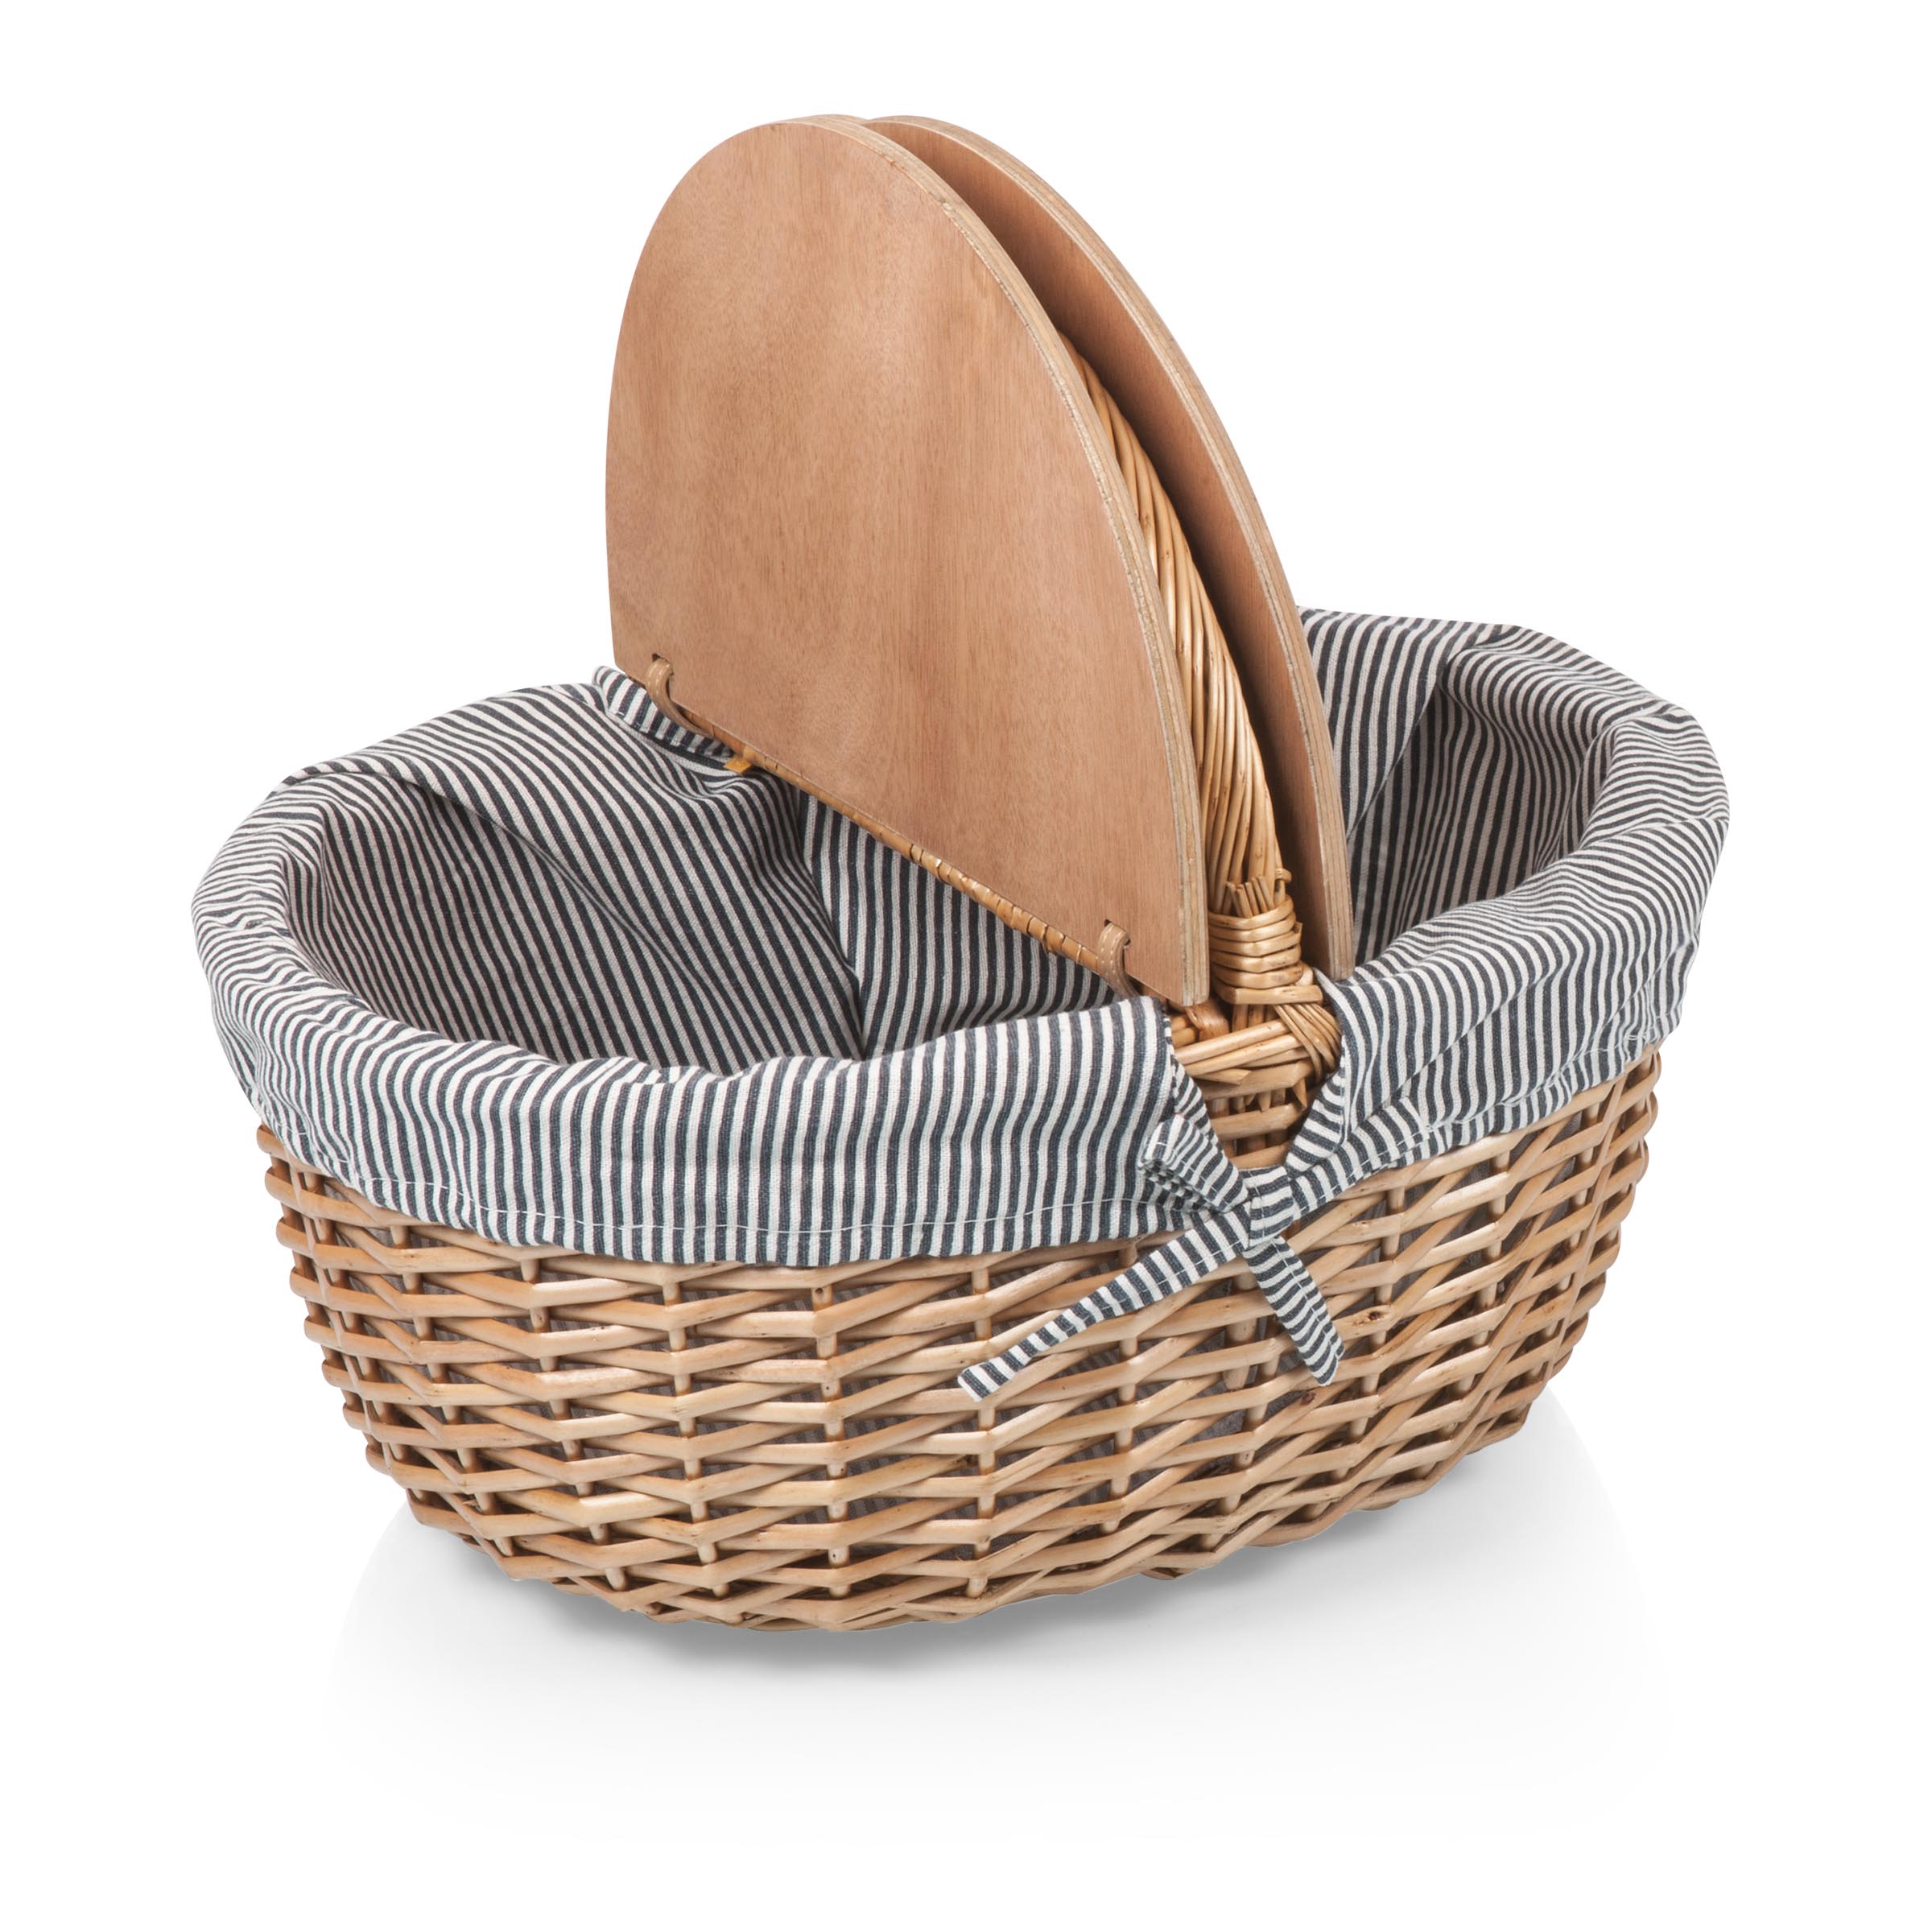 PICNIC TIME Country Picnic Basket - image 3 of 4